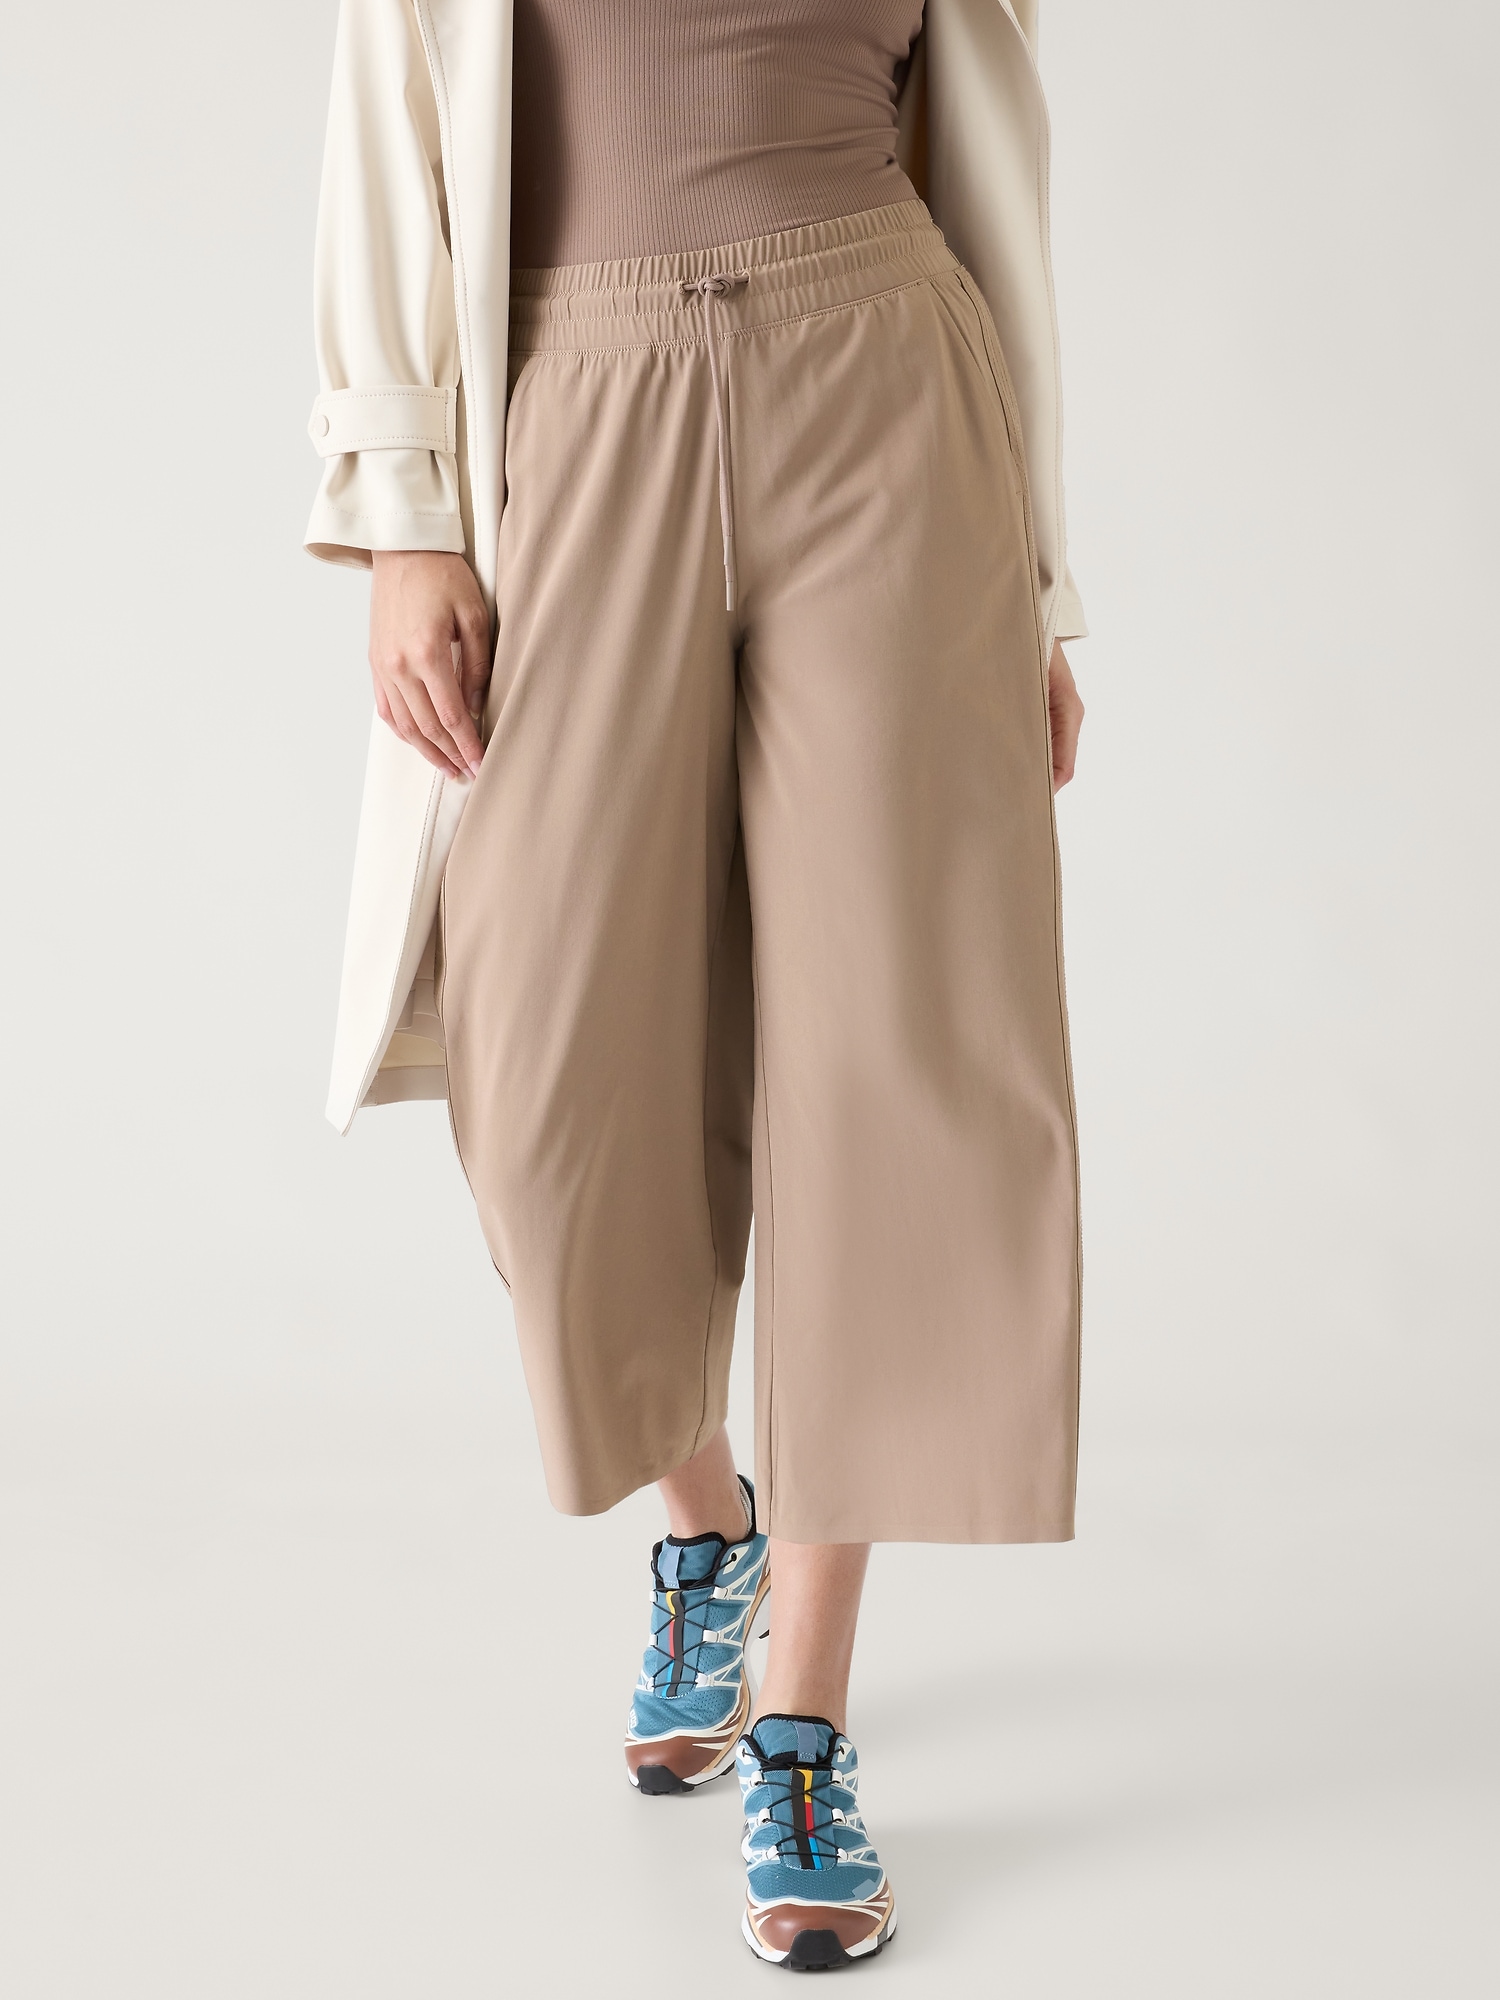 Stretch woven wide leg cropped pants, perfect for my 5'5” legs